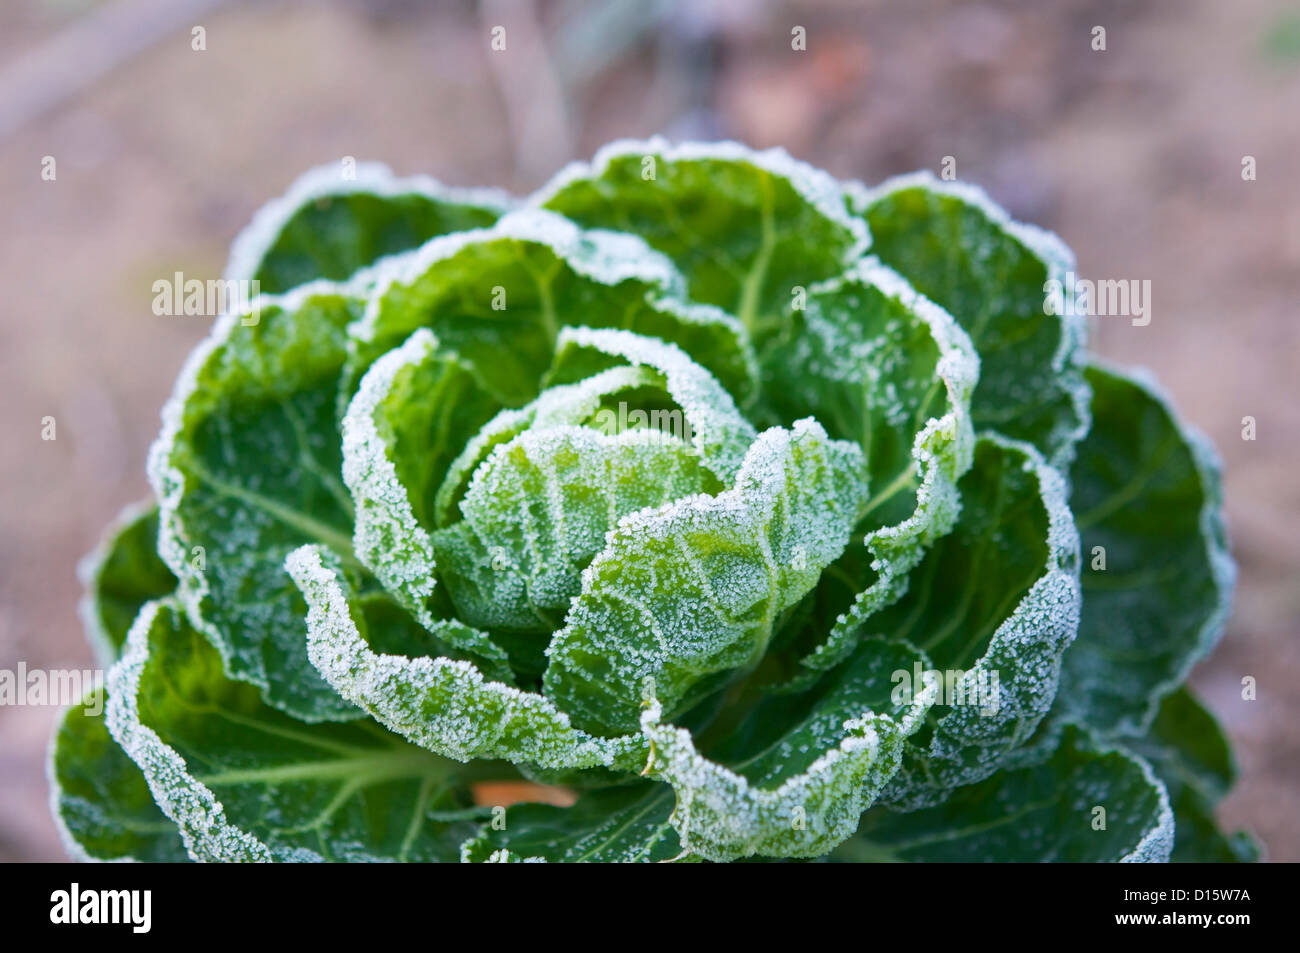 Brussels sprout plant covered in frost in December. Stock Photo